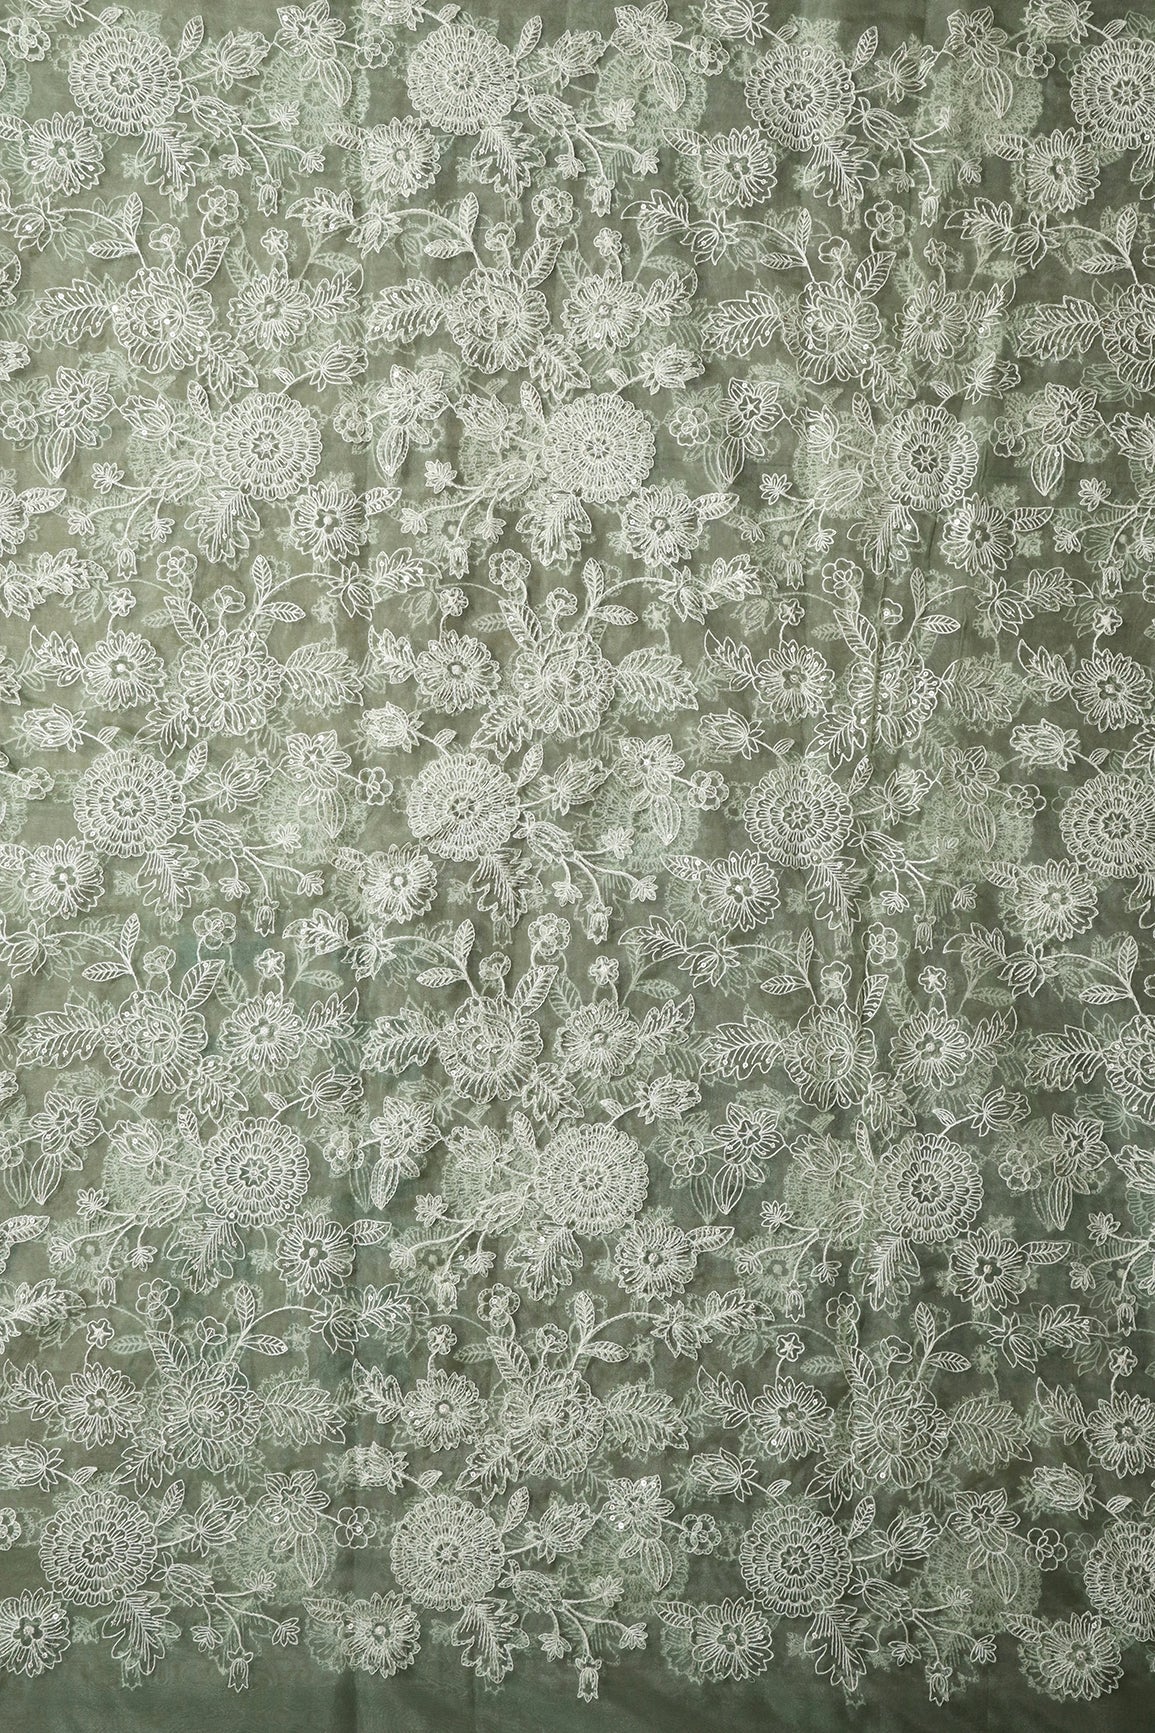 3 Meter Cut Piece Of White Thread With Gold Sequins Floral Embroidery On Olive Organza Fabric - doeraa